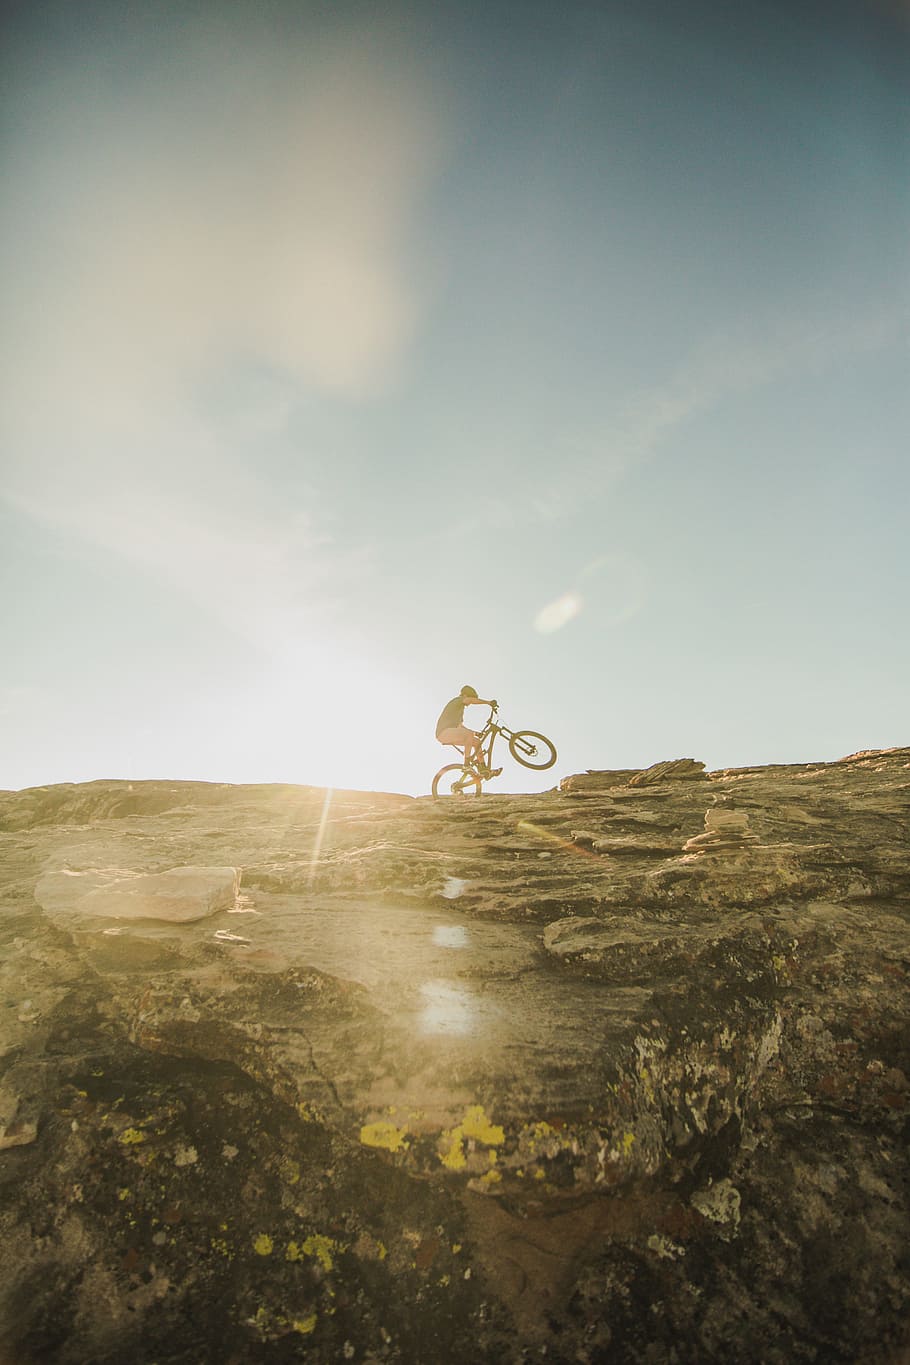 person riding on bicycle, man cycling on mountain, bike, stone